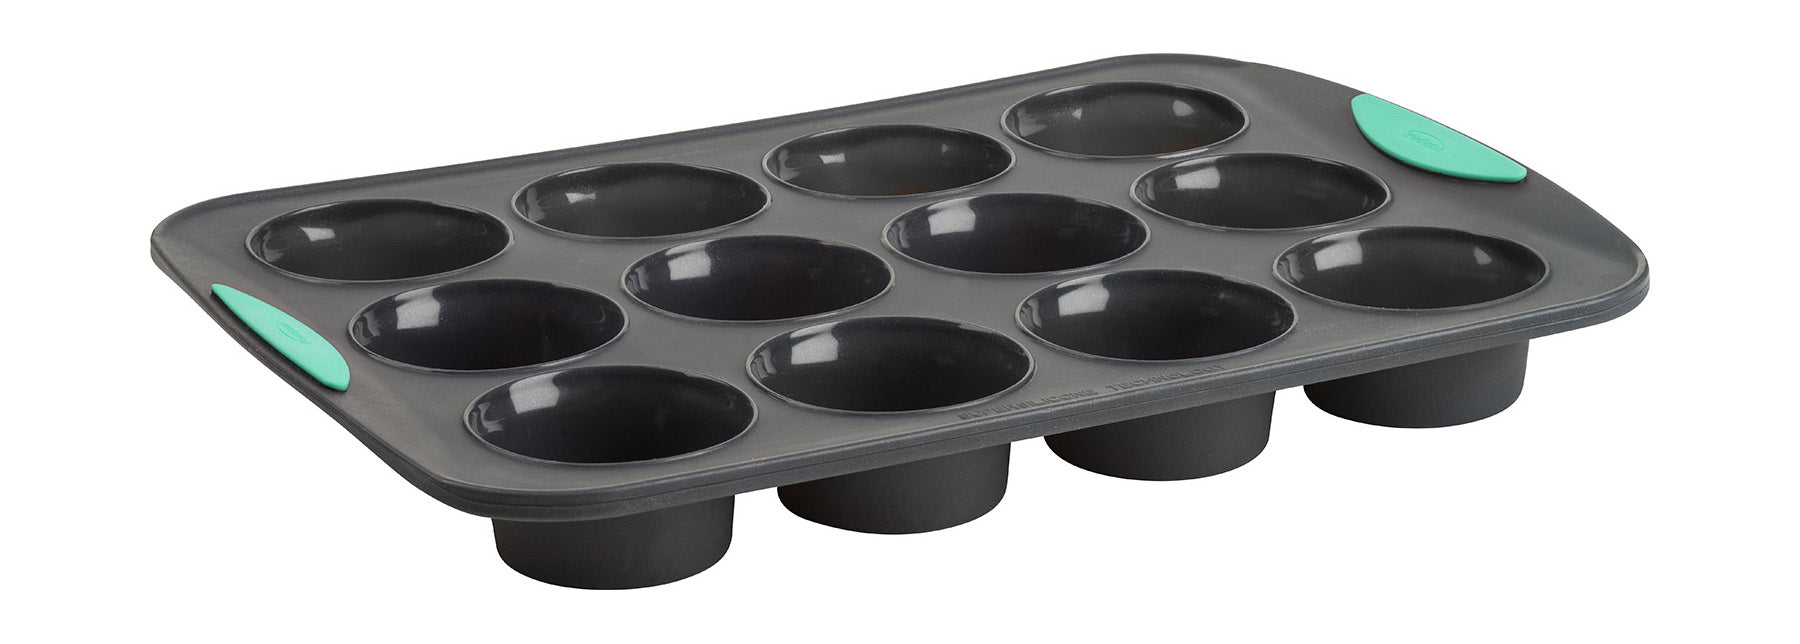 Trudeau Structure Silicone 12 Cavity Muffin Pan, Mint